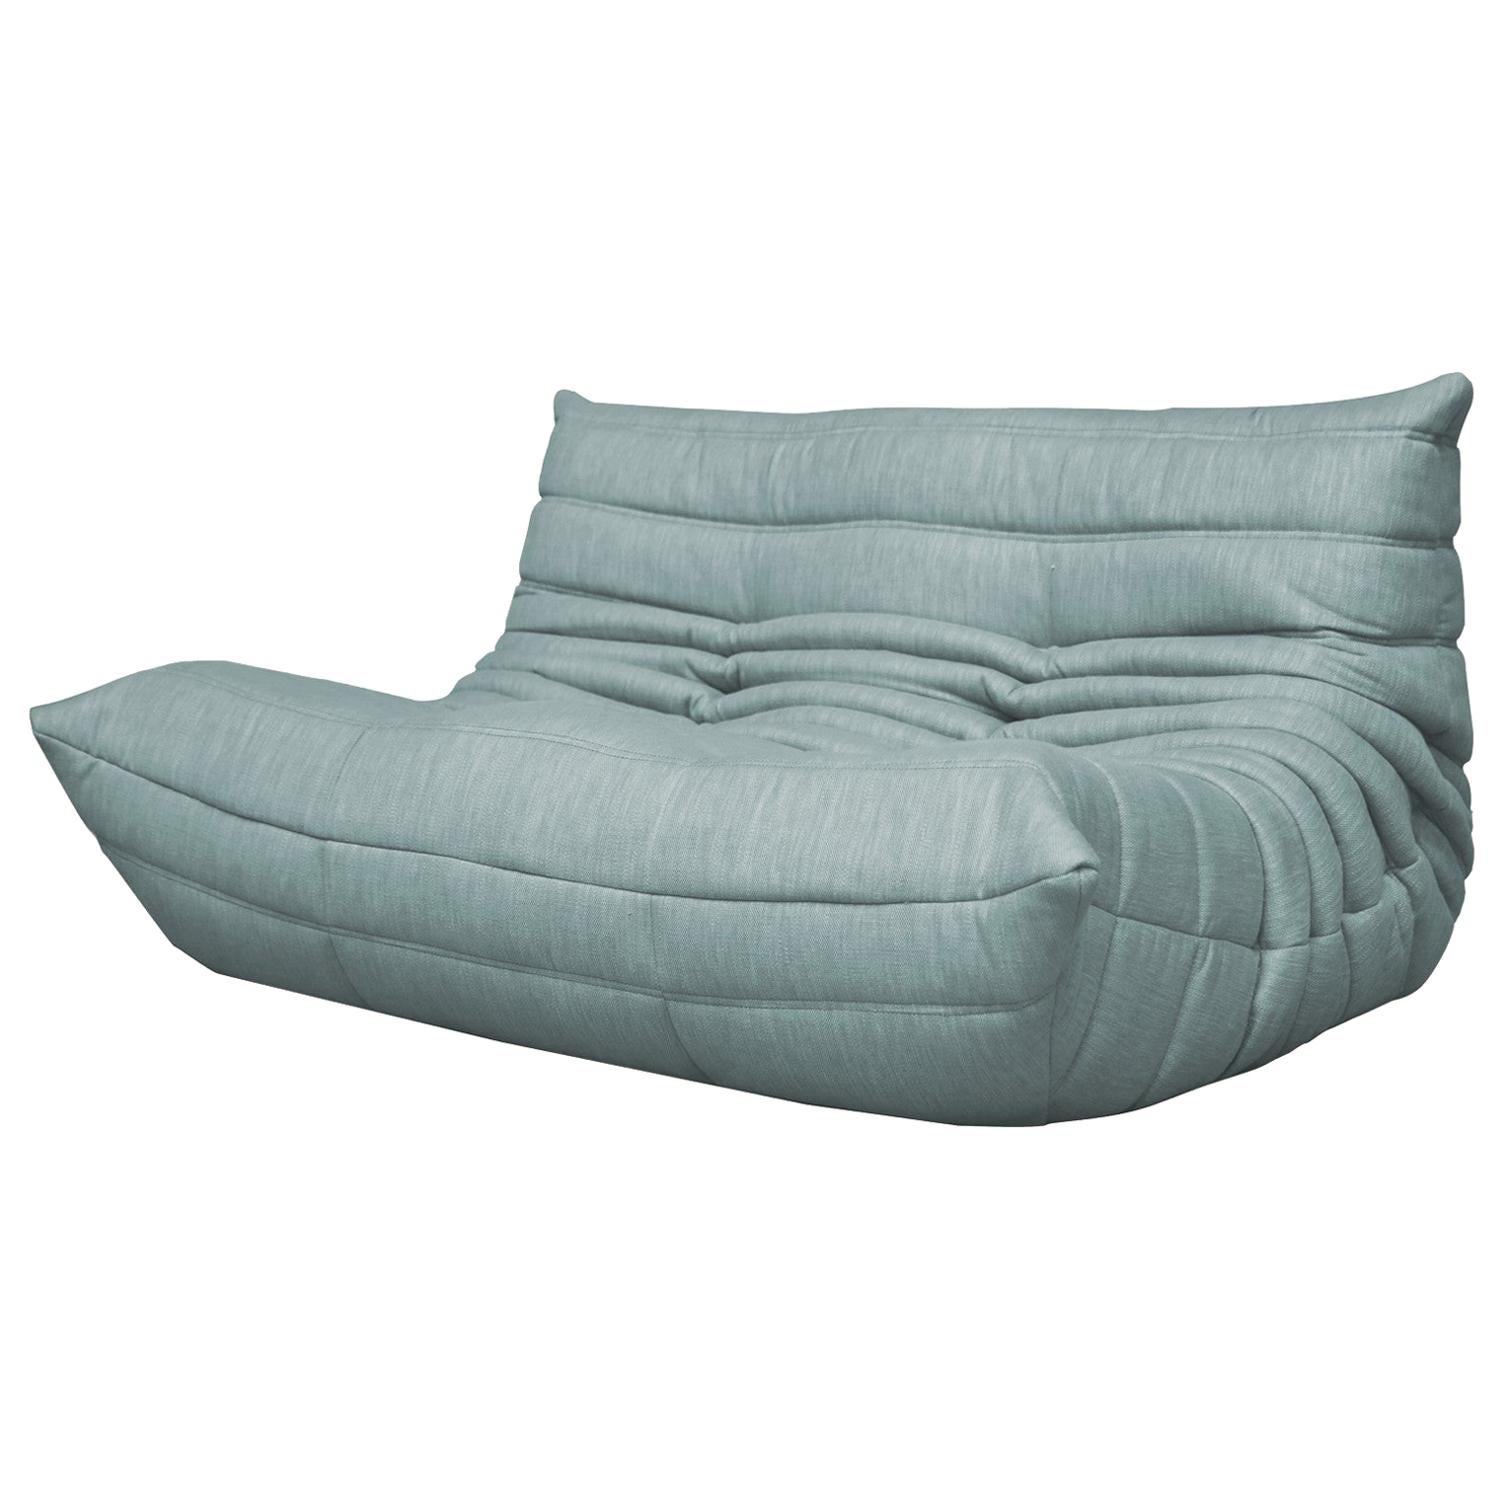 CERTIFIED Ligne Roset TOGO Loveseat in Durable "Celadon" Fabric, DIAMOND QUALITY For Sale